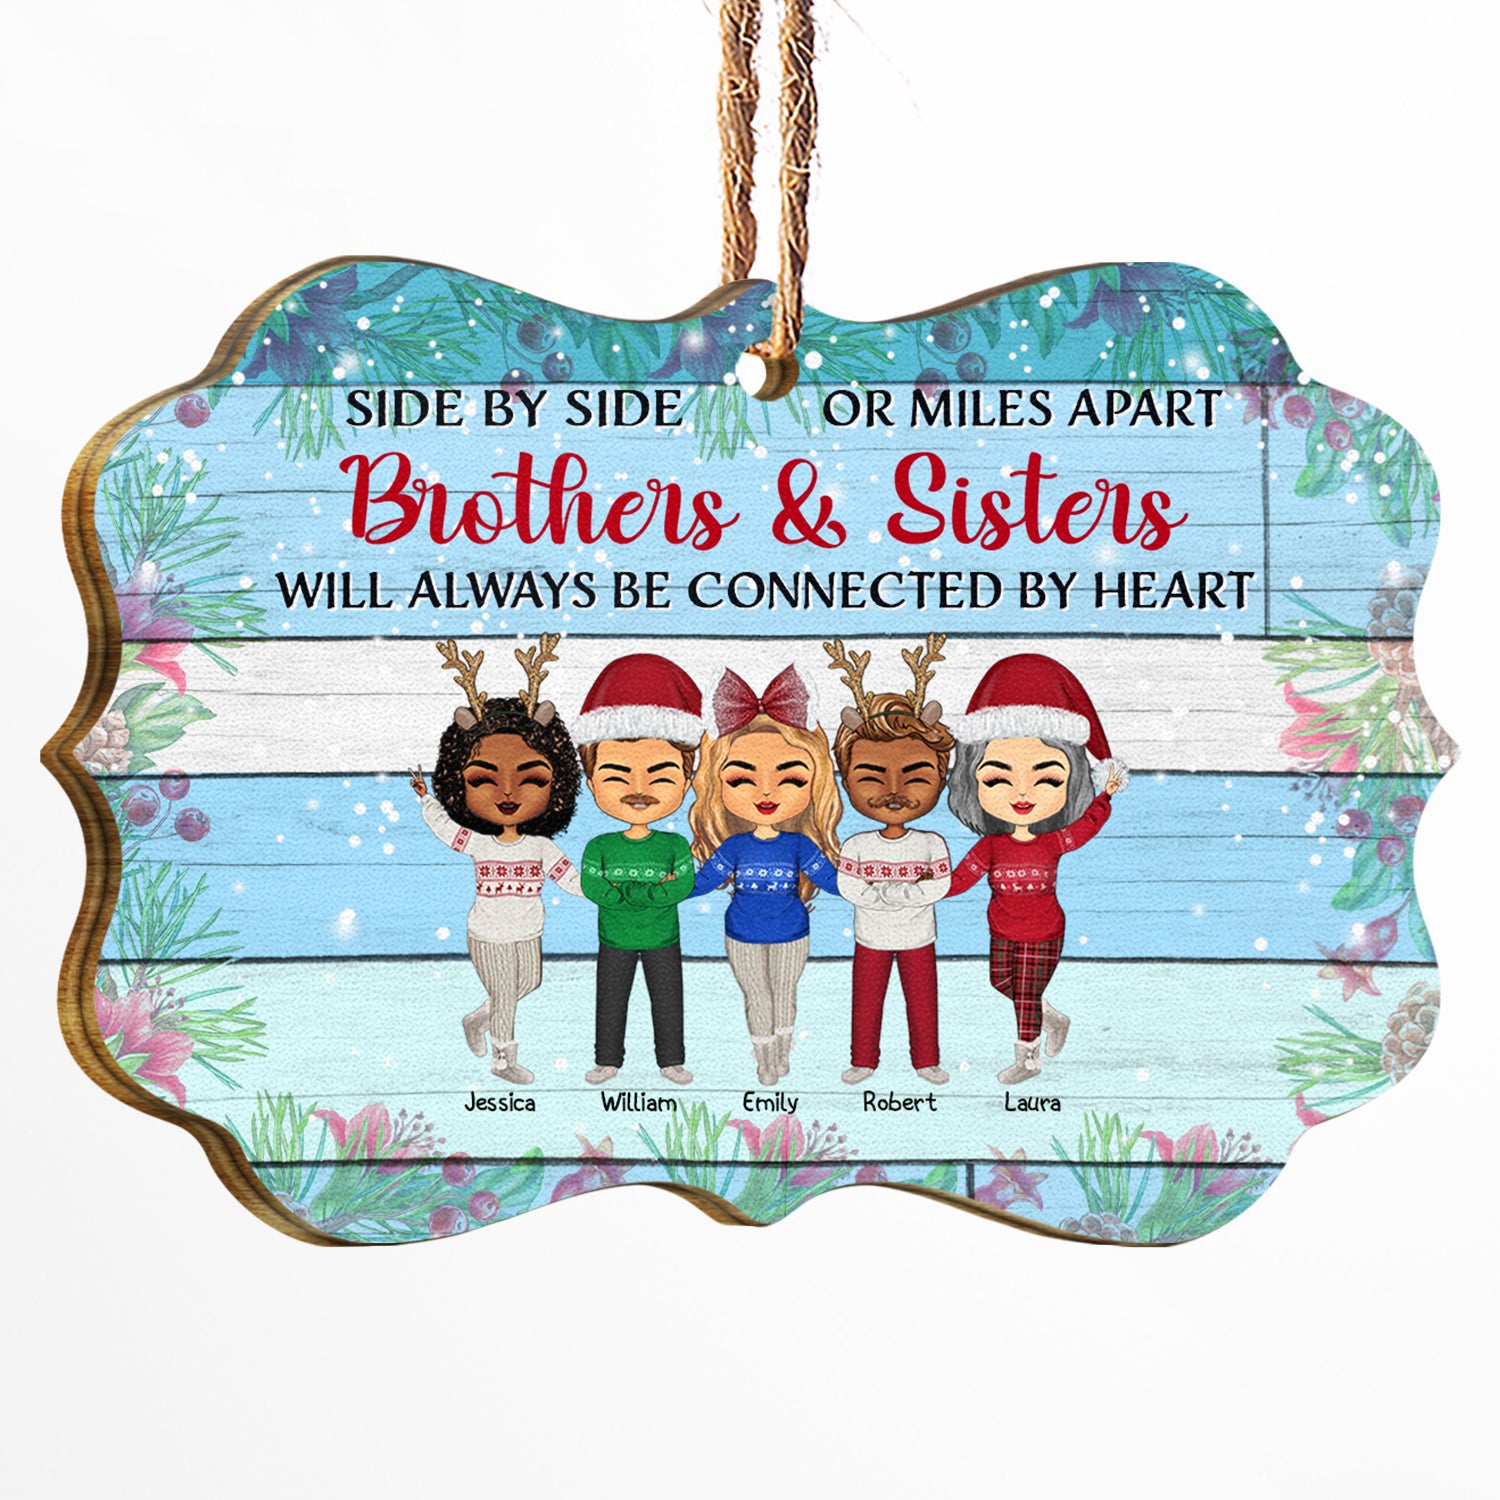 Side By Side Or Miles Apart Sisters And Brothers - Christmas Gift For Siblings - Personalized Wooden Ornament